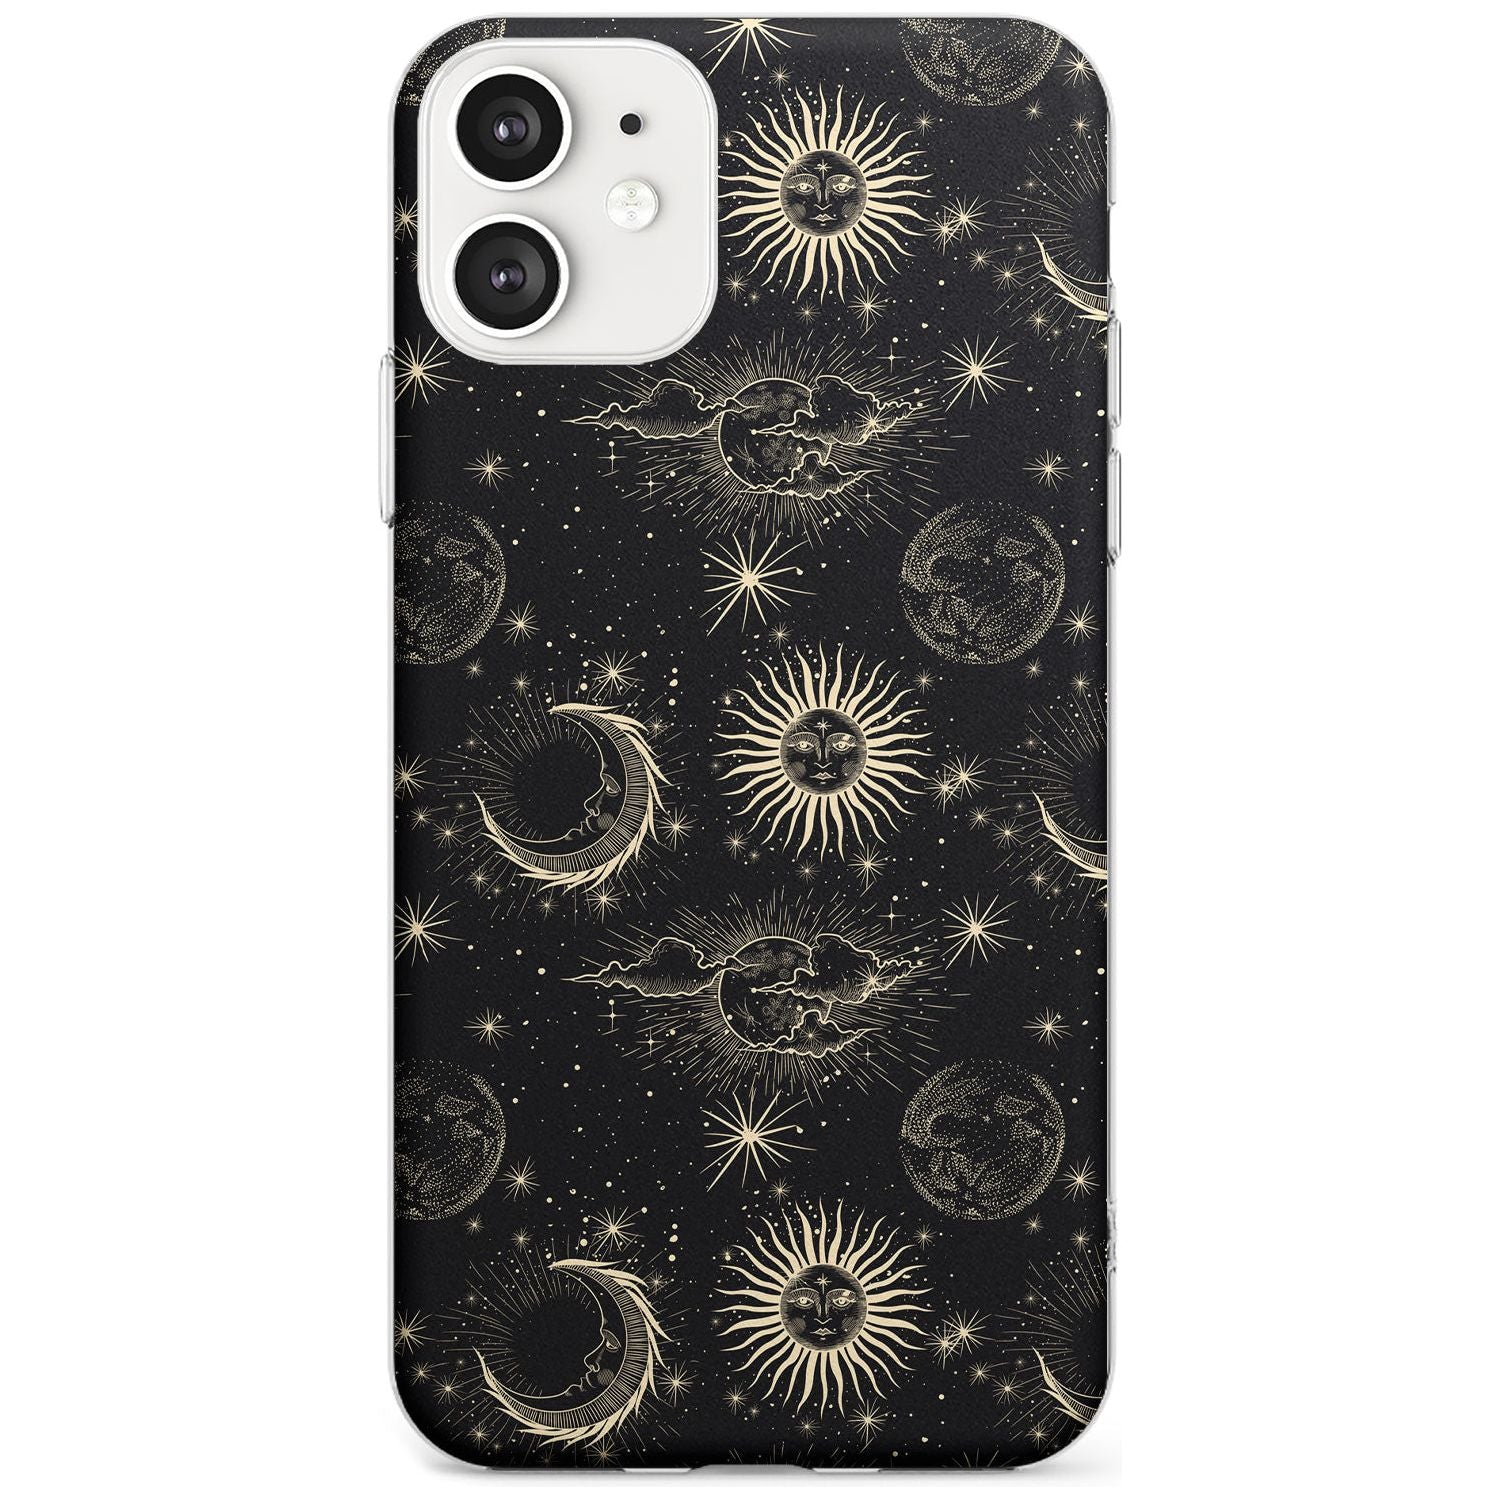 Large Suns, Moons & Clouds Black Impact Phone Case for iPhone 11